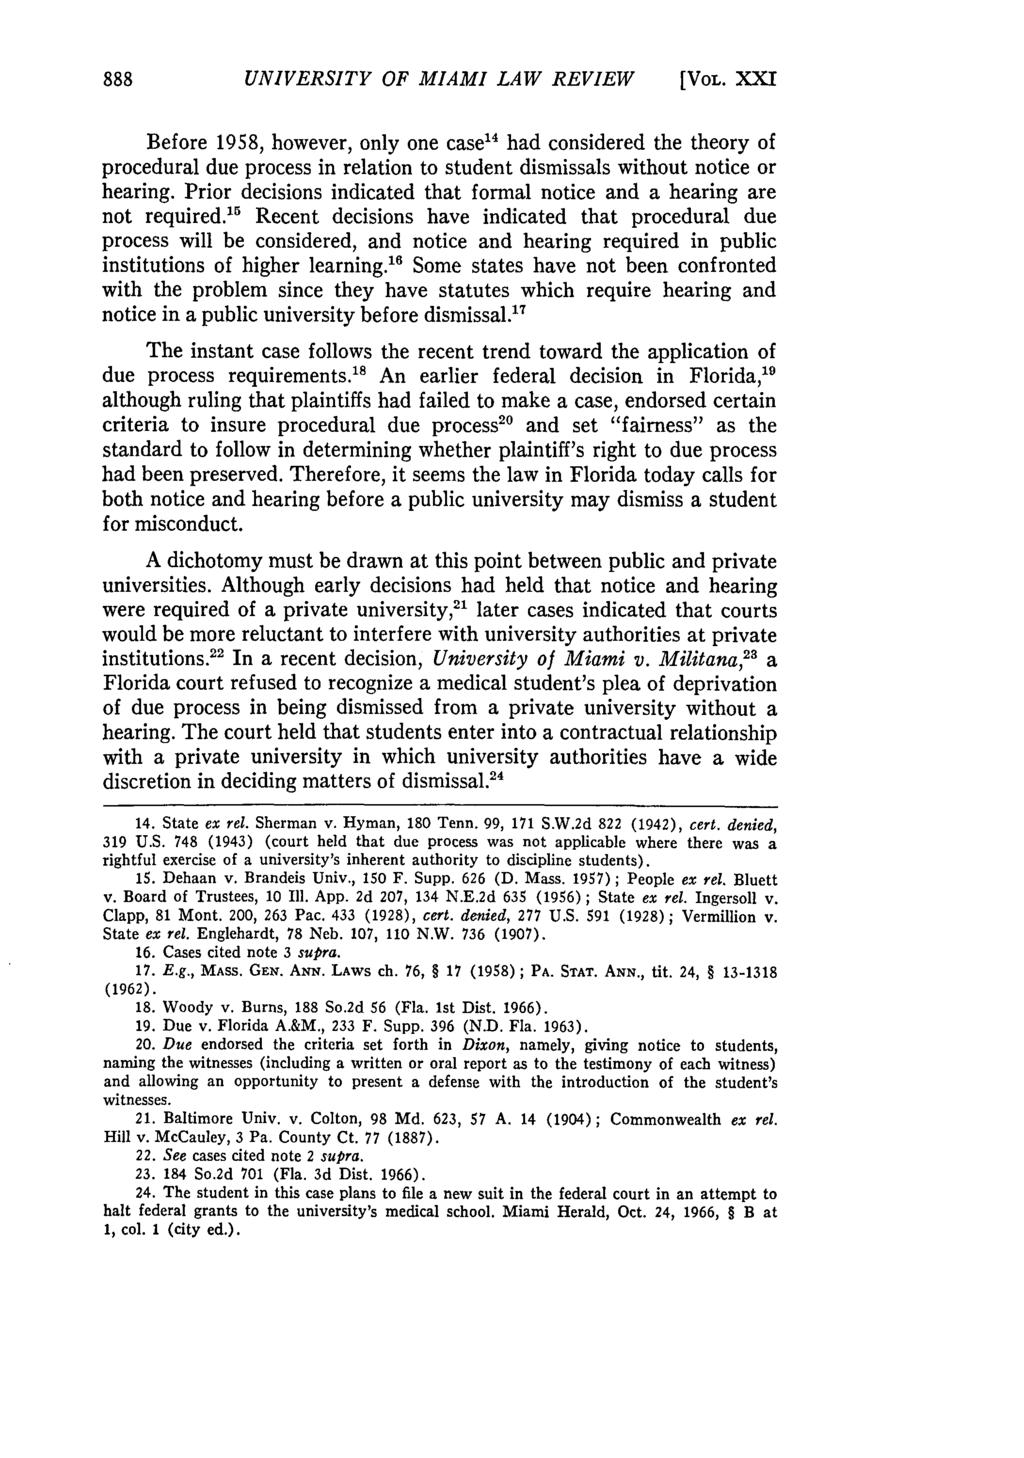 UNIVERSITY OF MIAMI LAW REVIEW [VOL. XXM Before 1958, however, only one case 4 had considered the theory of procedural due process in relation to student dismissals without notice or hearing.